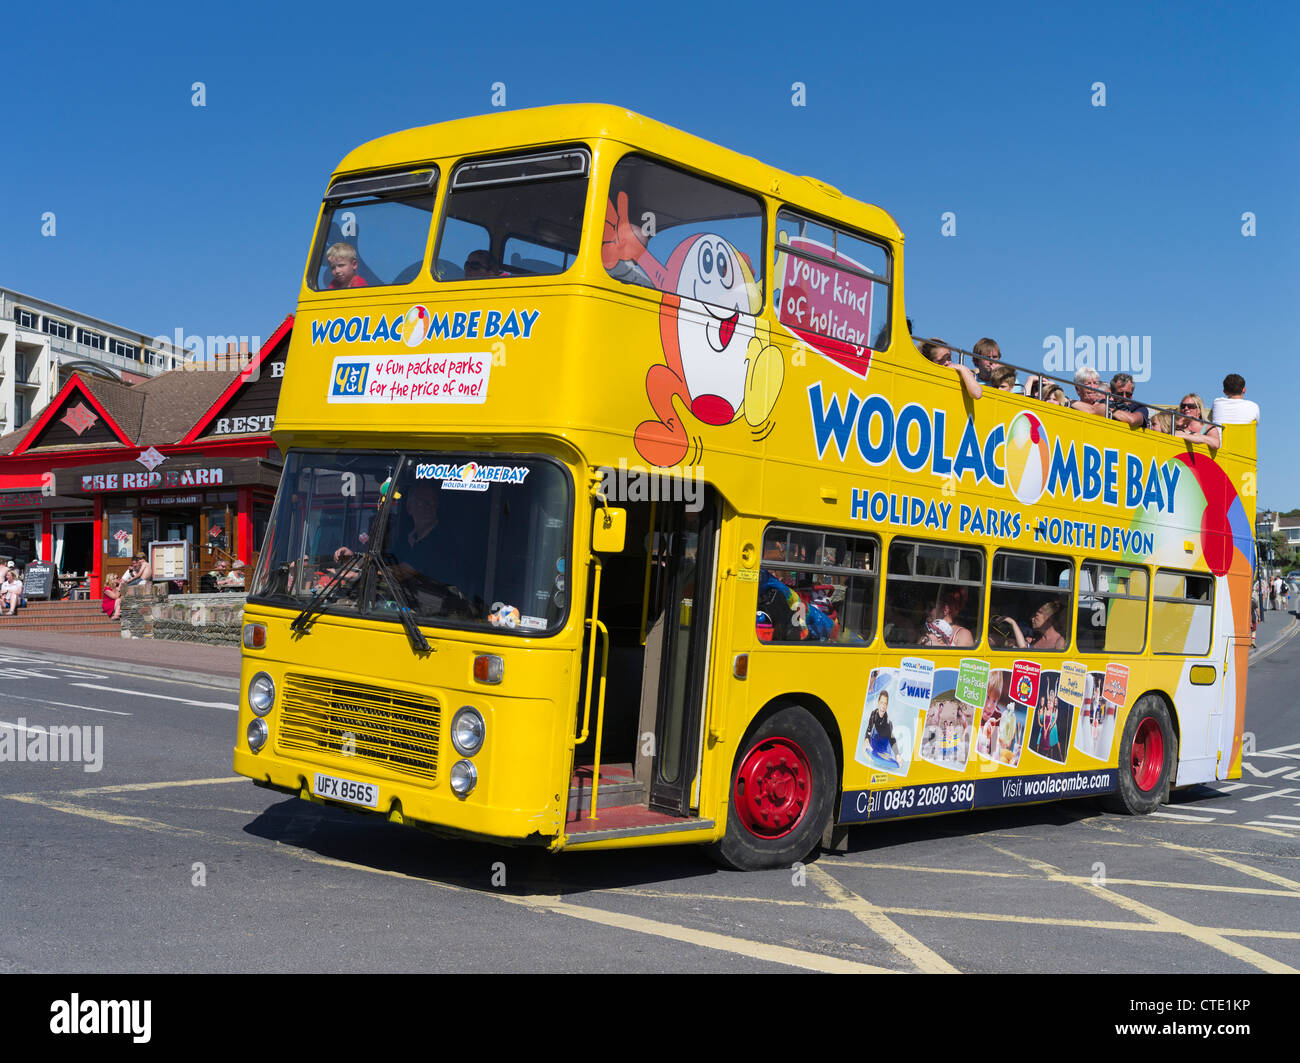 dh Open air top bus WOOLACOMBE DEVON Woolacombe Bay tourist seaside english holiday on buses uk Stock Photo